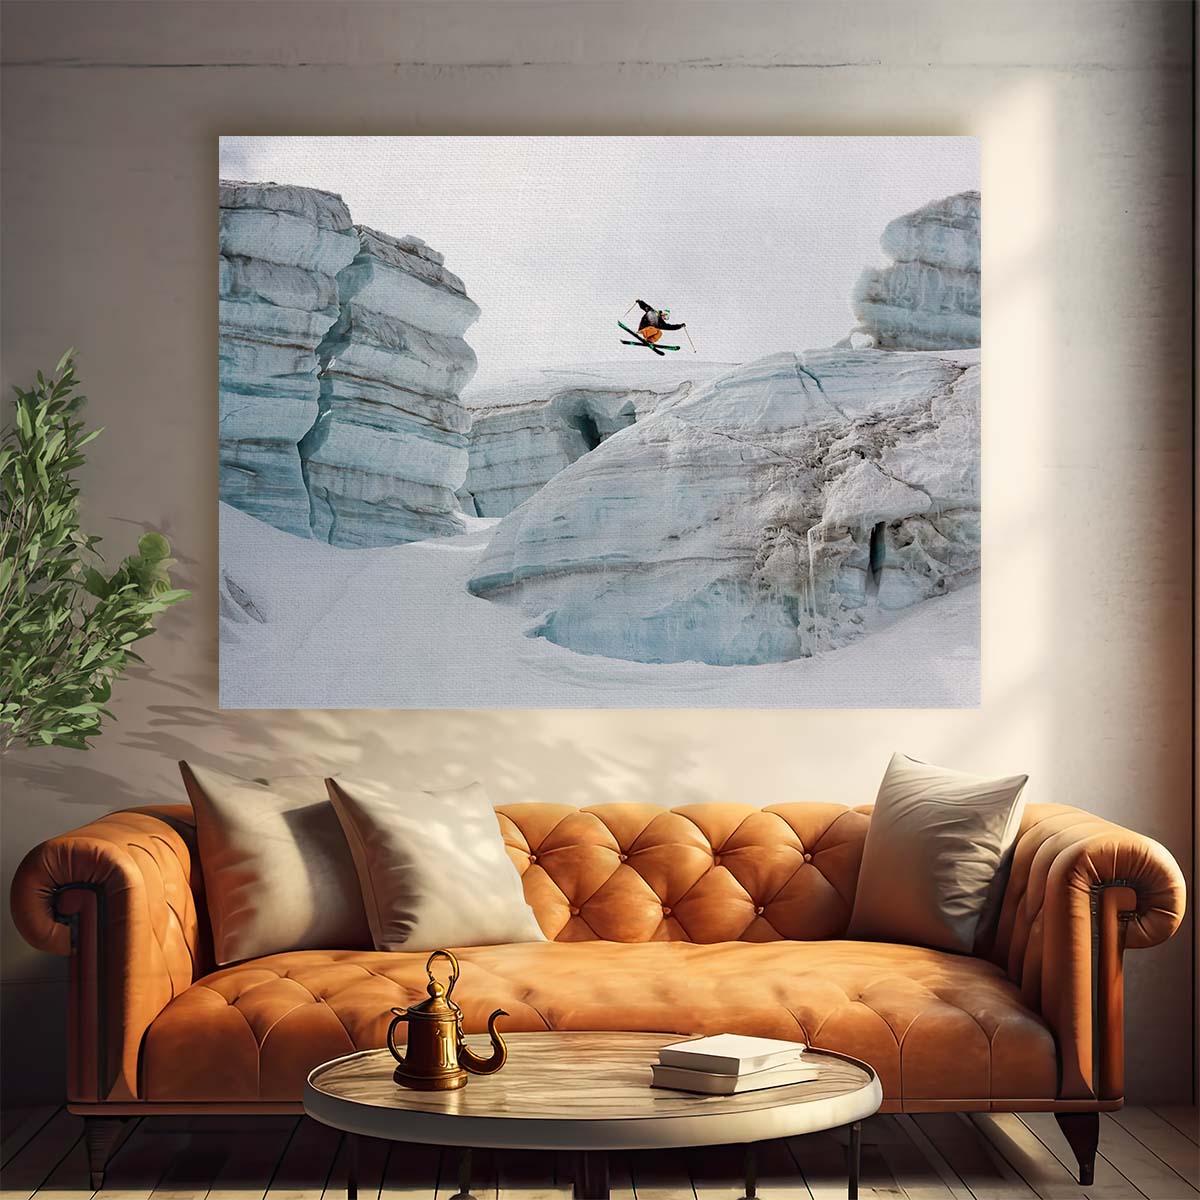 Extreme Freeski Action in Chamonix Alps Wall Art by Luxuriance Designs. Made in USA.